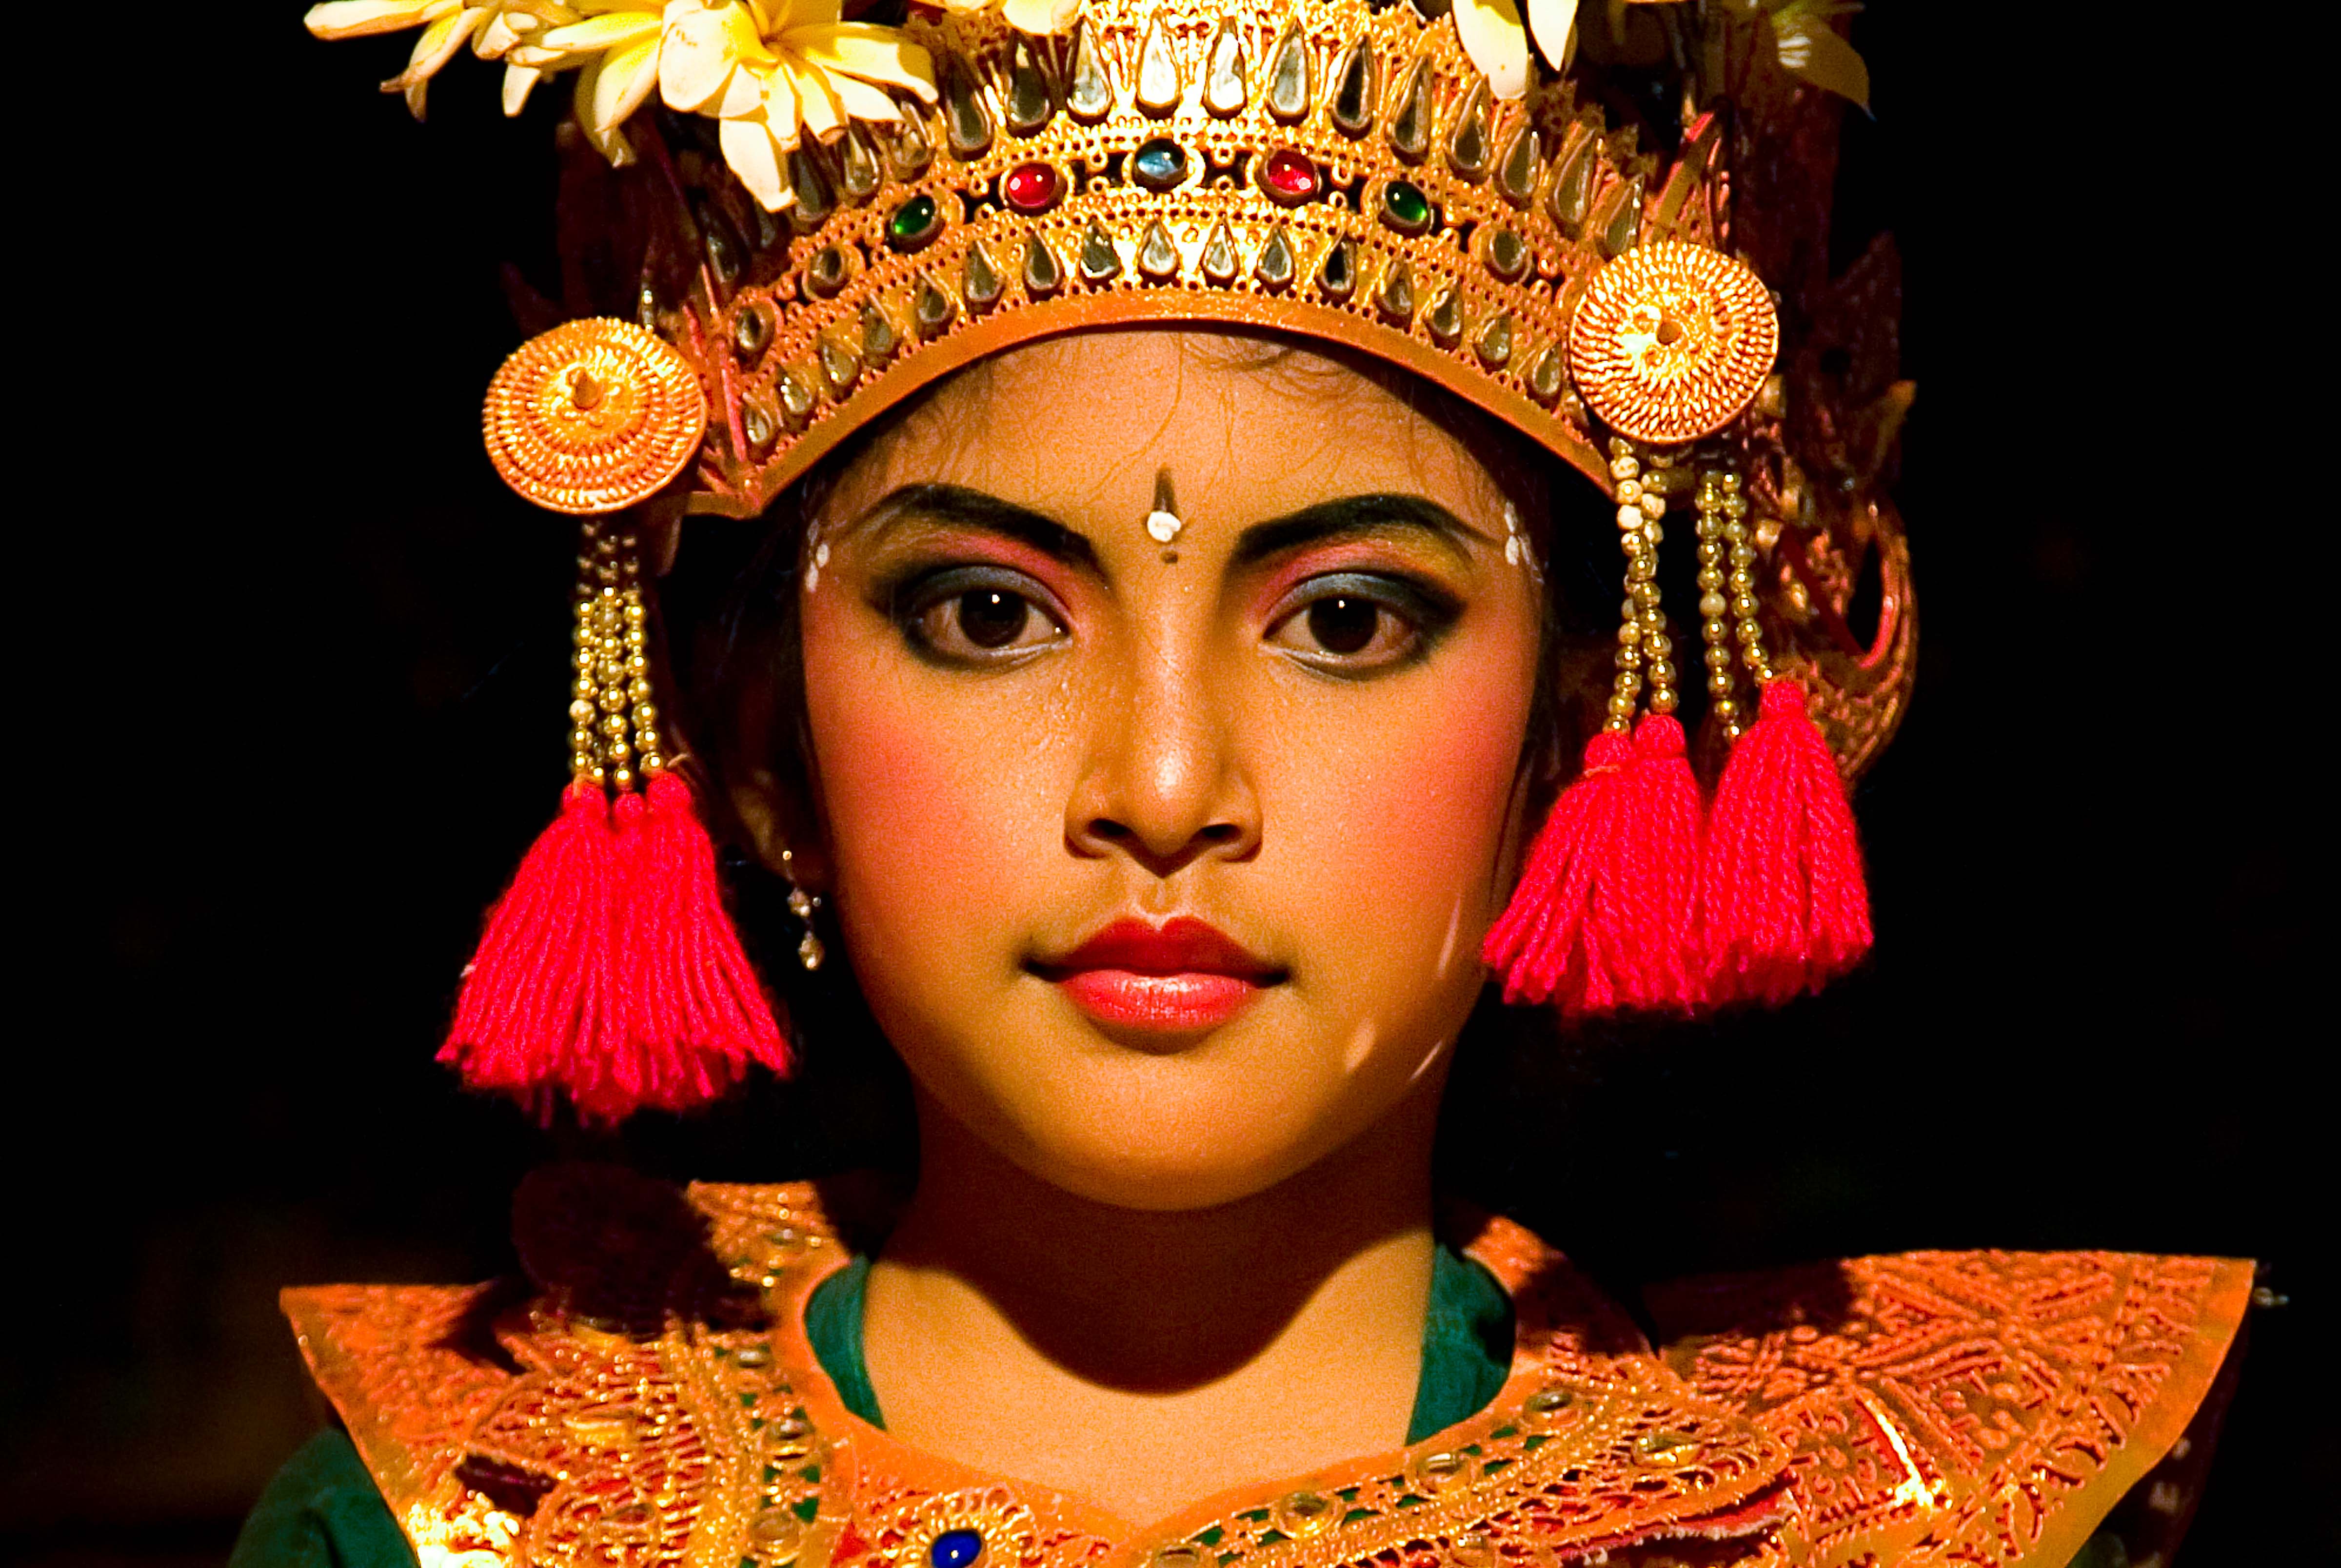 Indonesia, Bali, Young Dancer, 2005